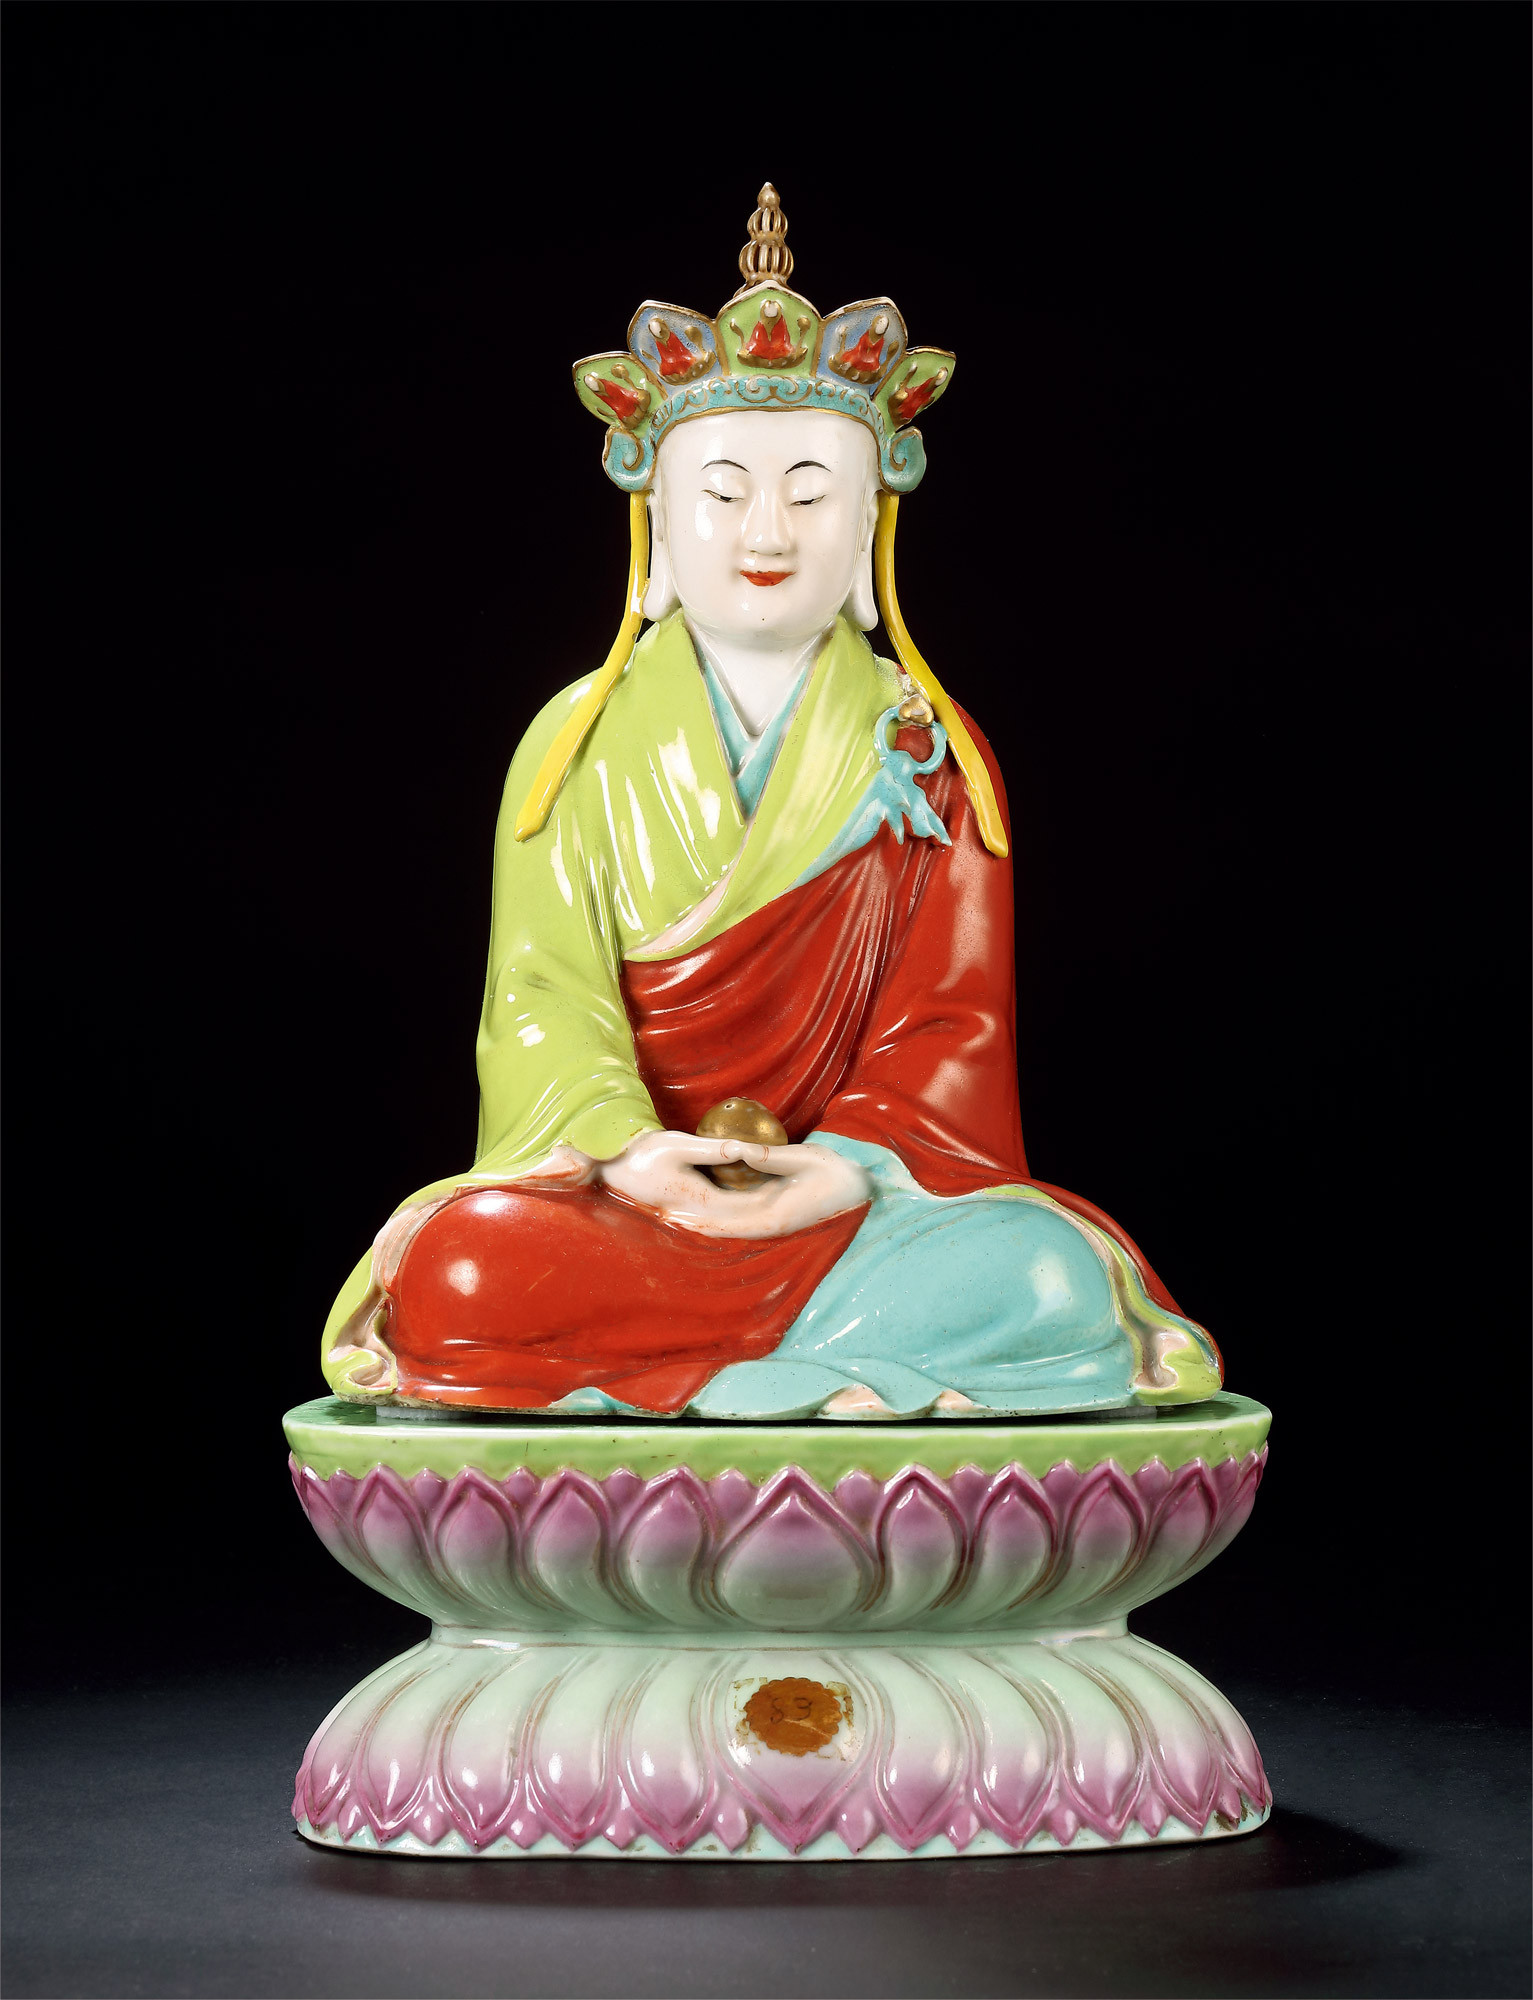 A FAMILLE-ROSE SEATED SCULPTURE OF KSITIGARBHA